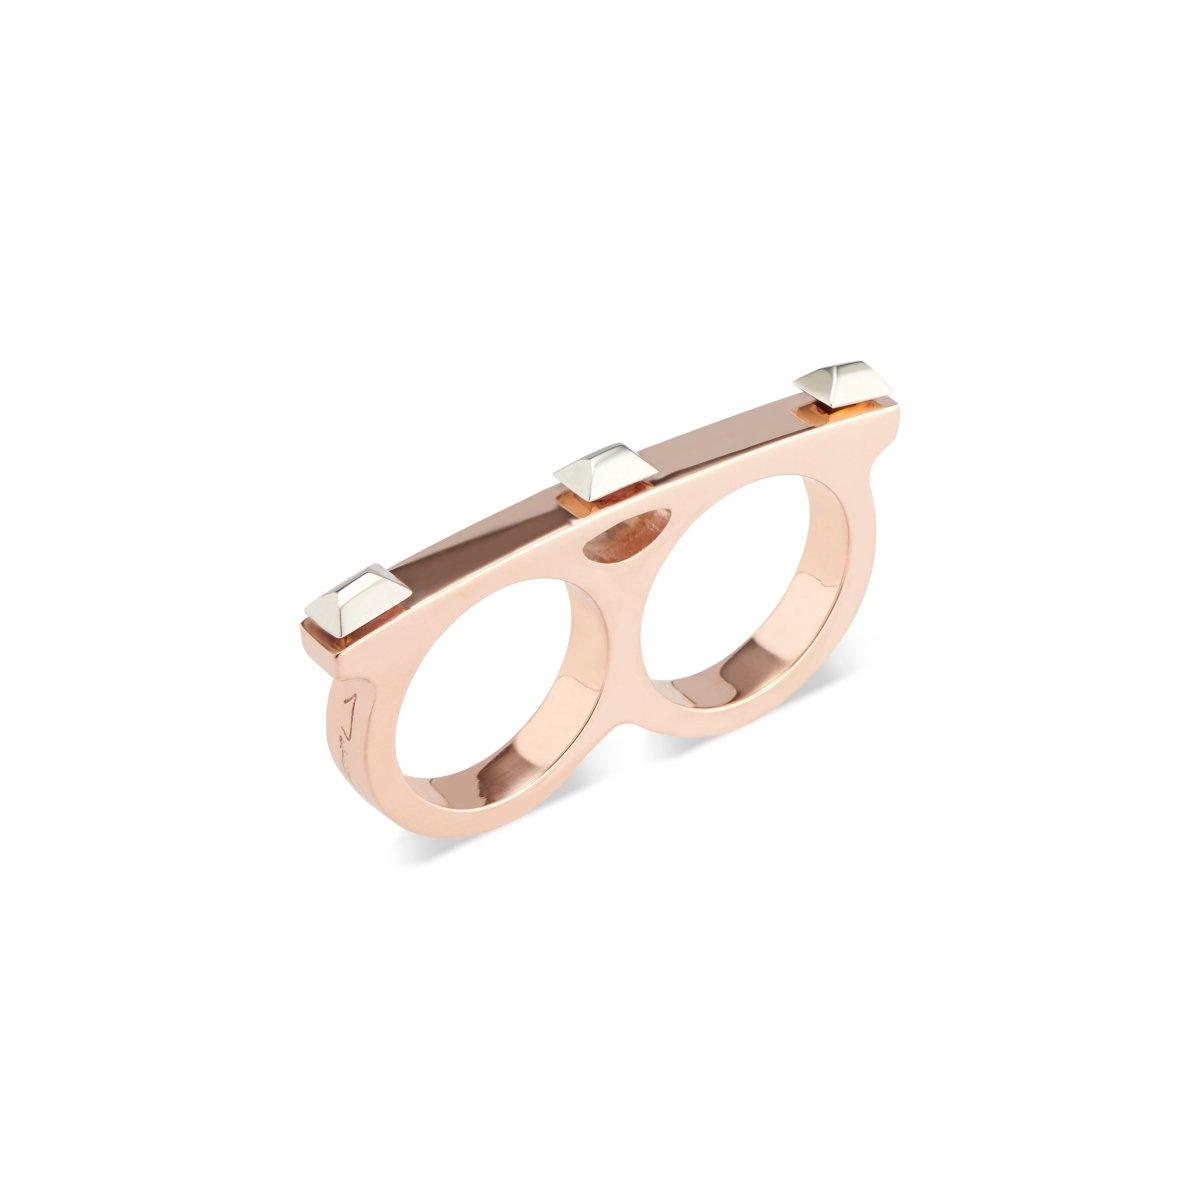 Rose Gold Sparks Fly Double Finger Matchstick Ring - Nataly Aponte